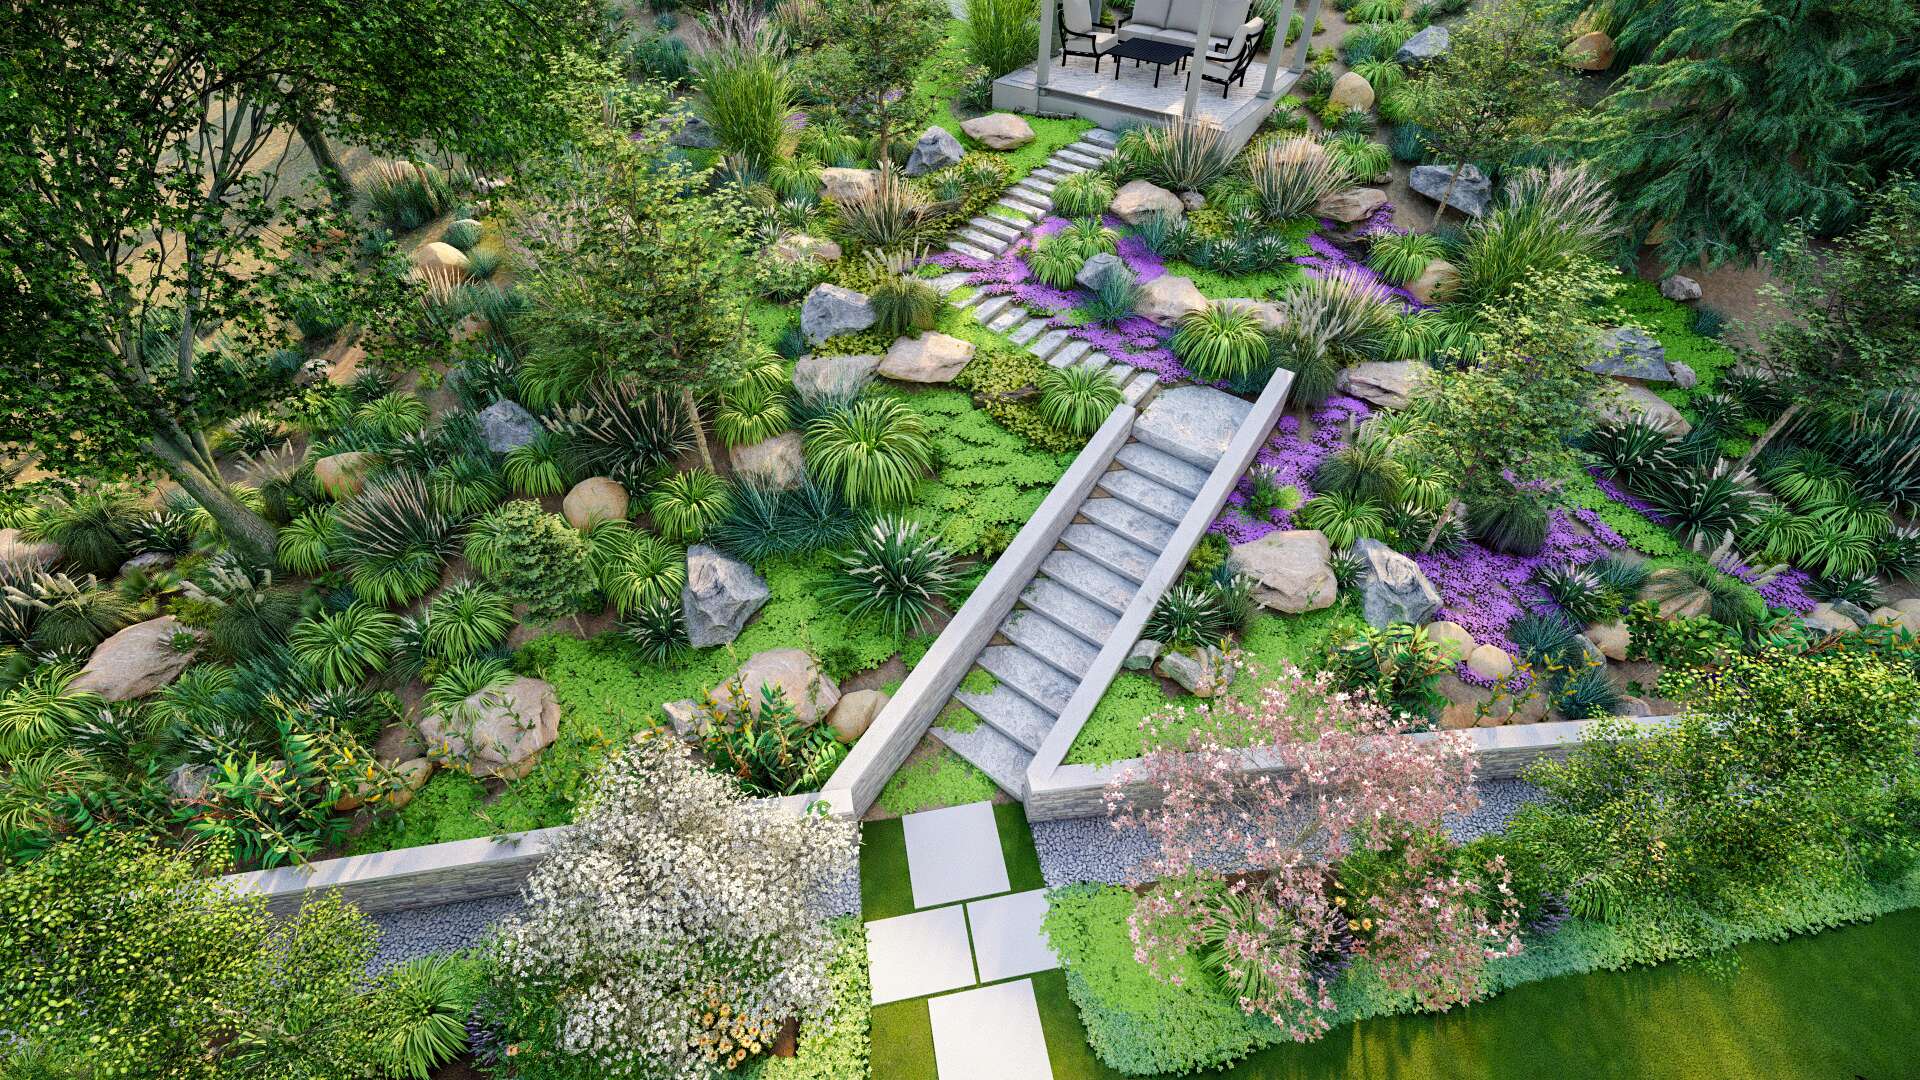 Aerial view of a lush backyard with diverse vegetation, stone pathways, and a modern gazebo amidst vibrant flowering plants